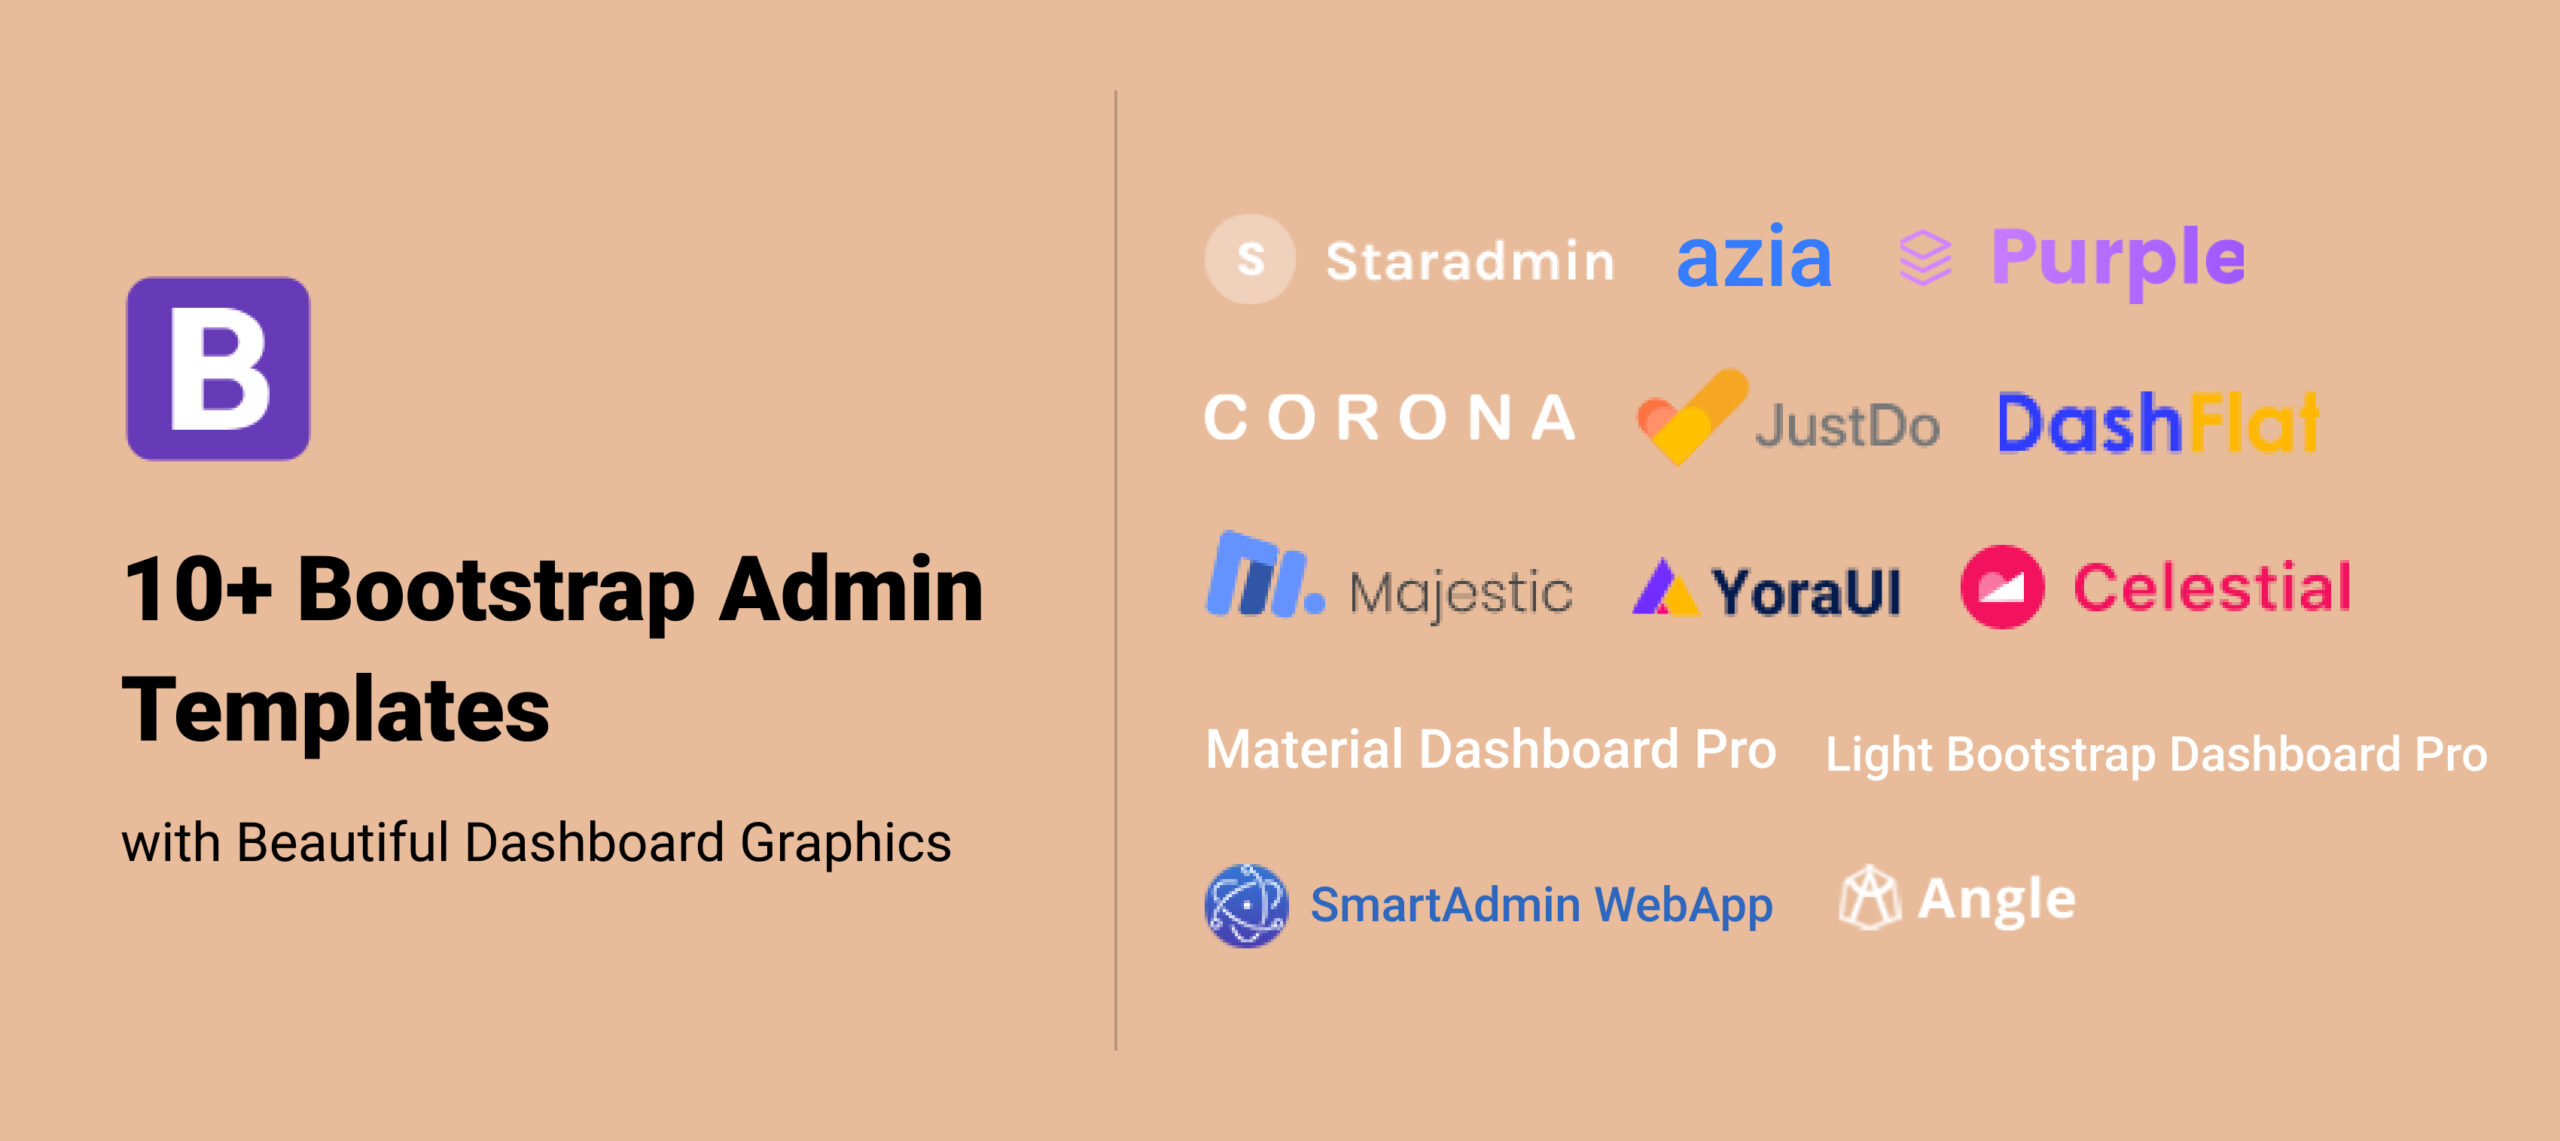  10+ Bootstrap Admin Templates with Beautiful Dashboard Graphics